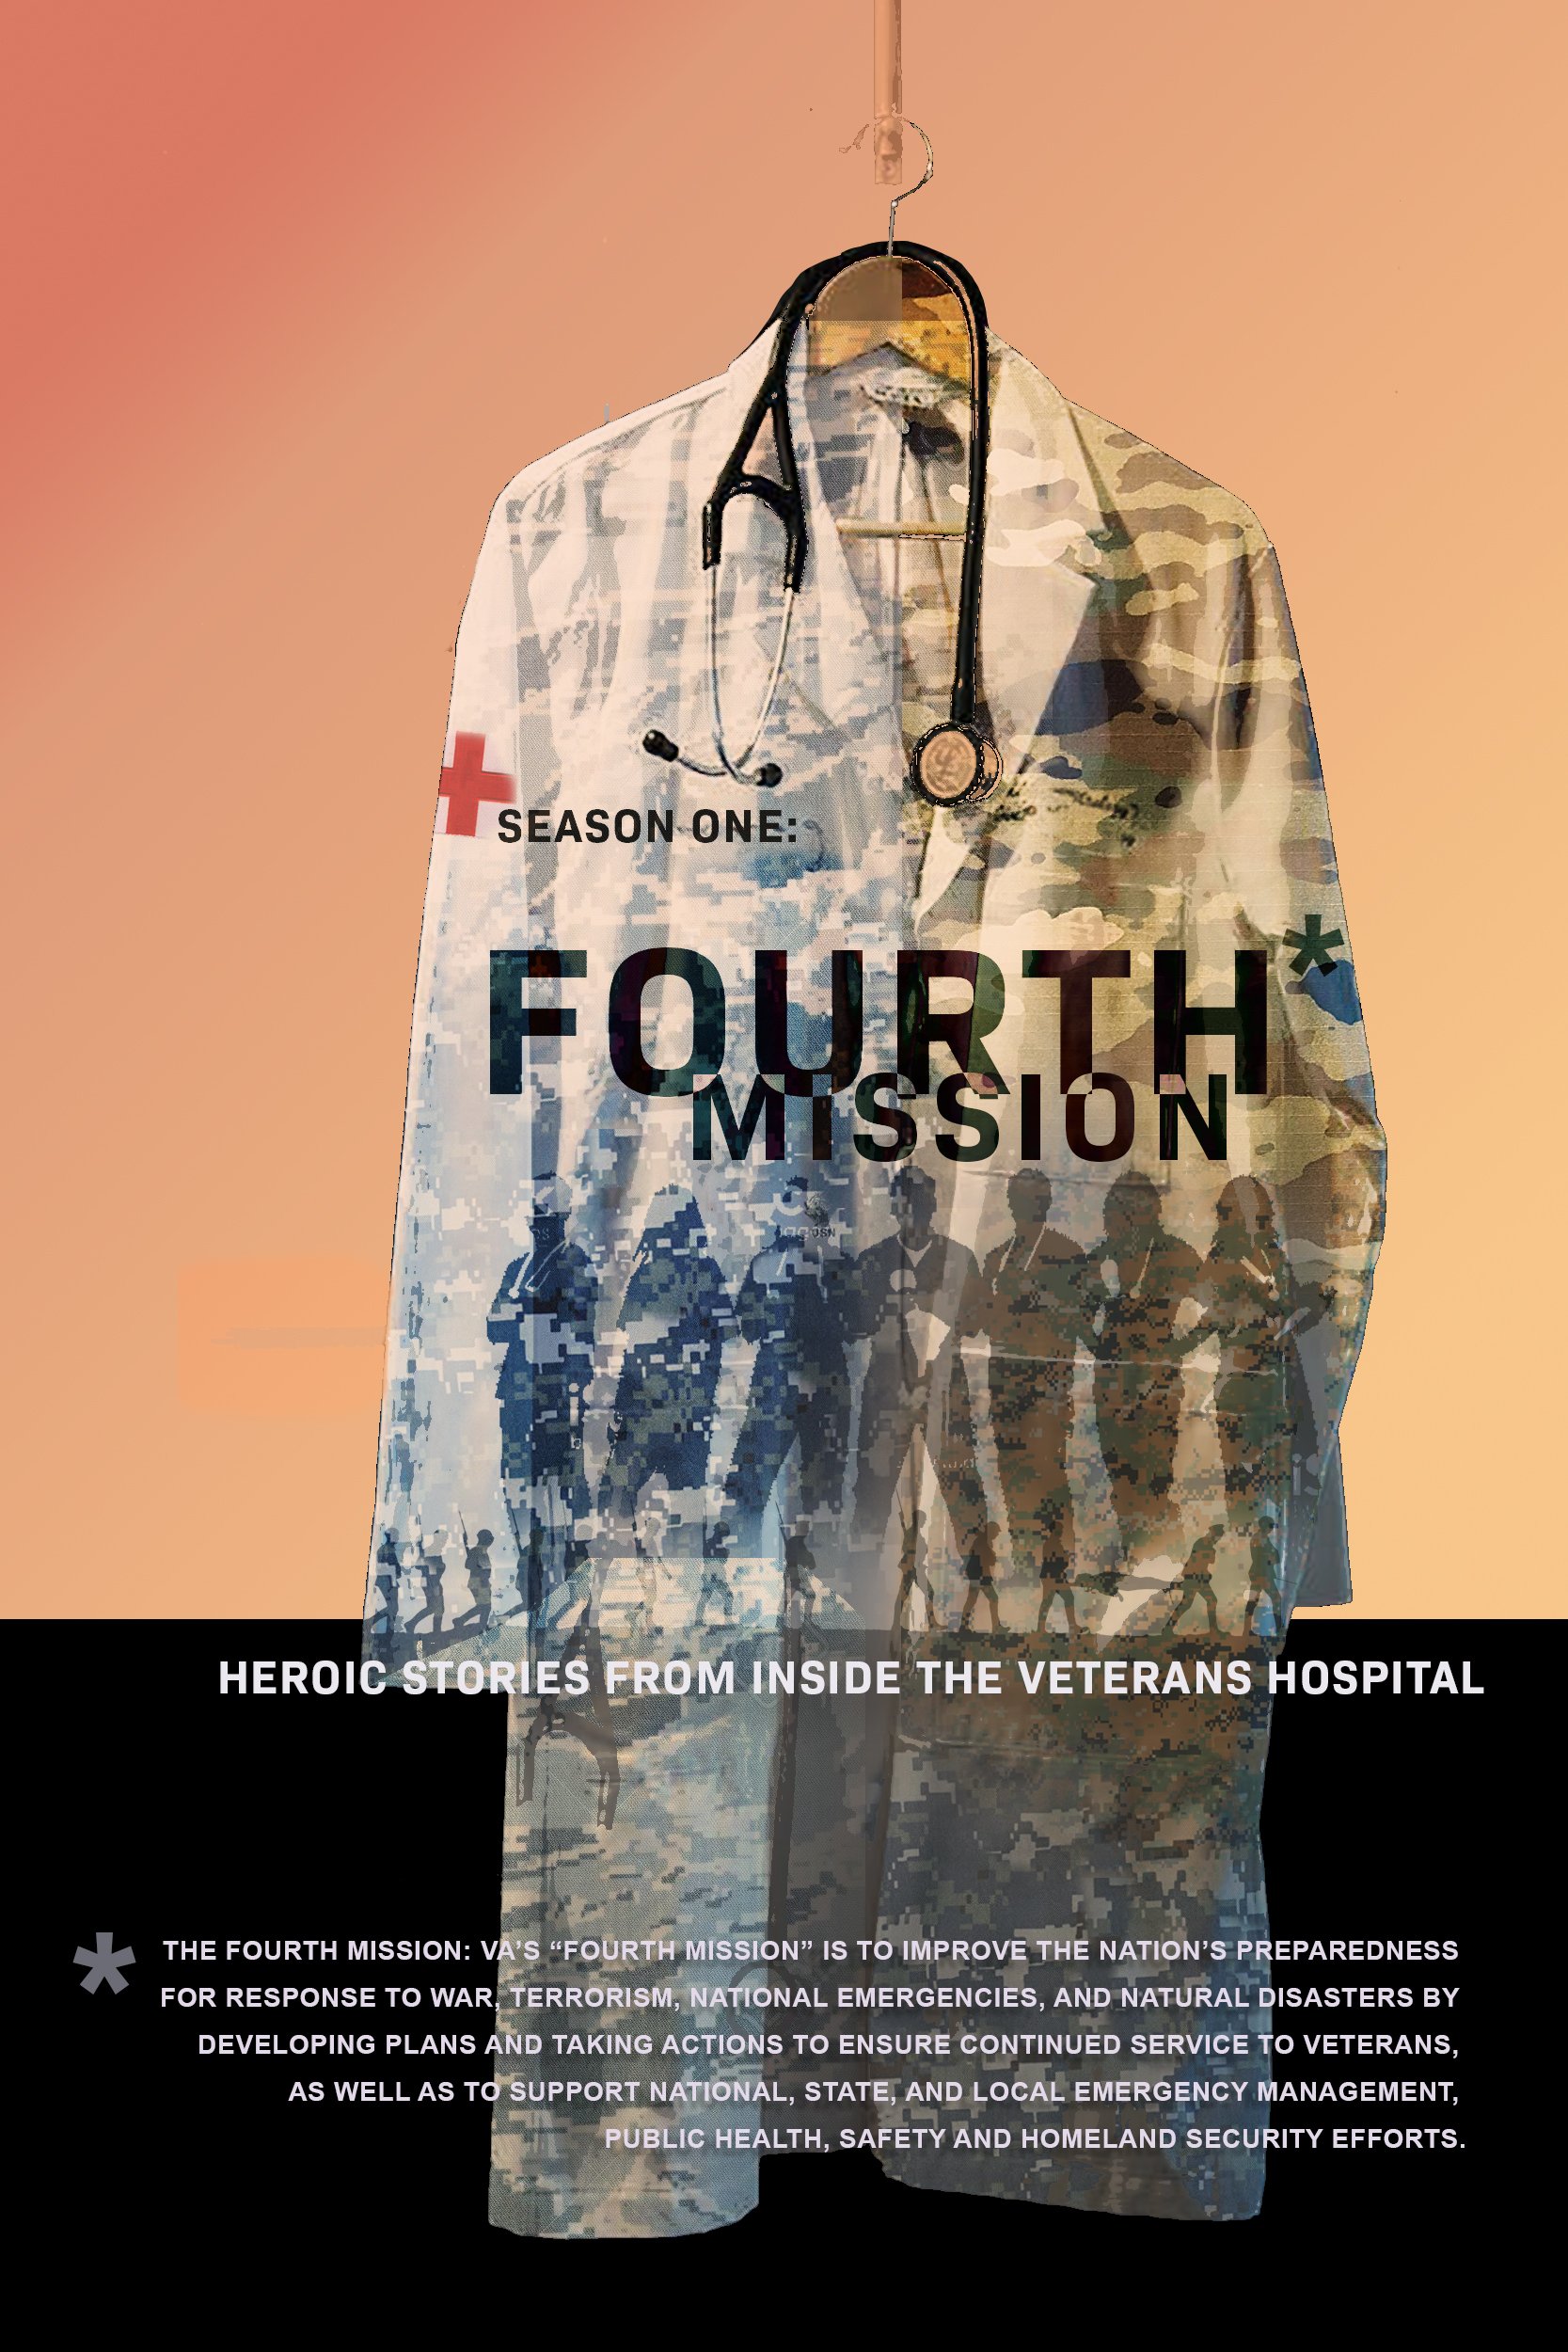  As we emerge from the pandemic, we are looking for sure footing on a new path forward as neighbors, colleagues, parents, and citizens. The stories of the doctors, nurses, and specialists who led us out of the darkness are a good place to start. With